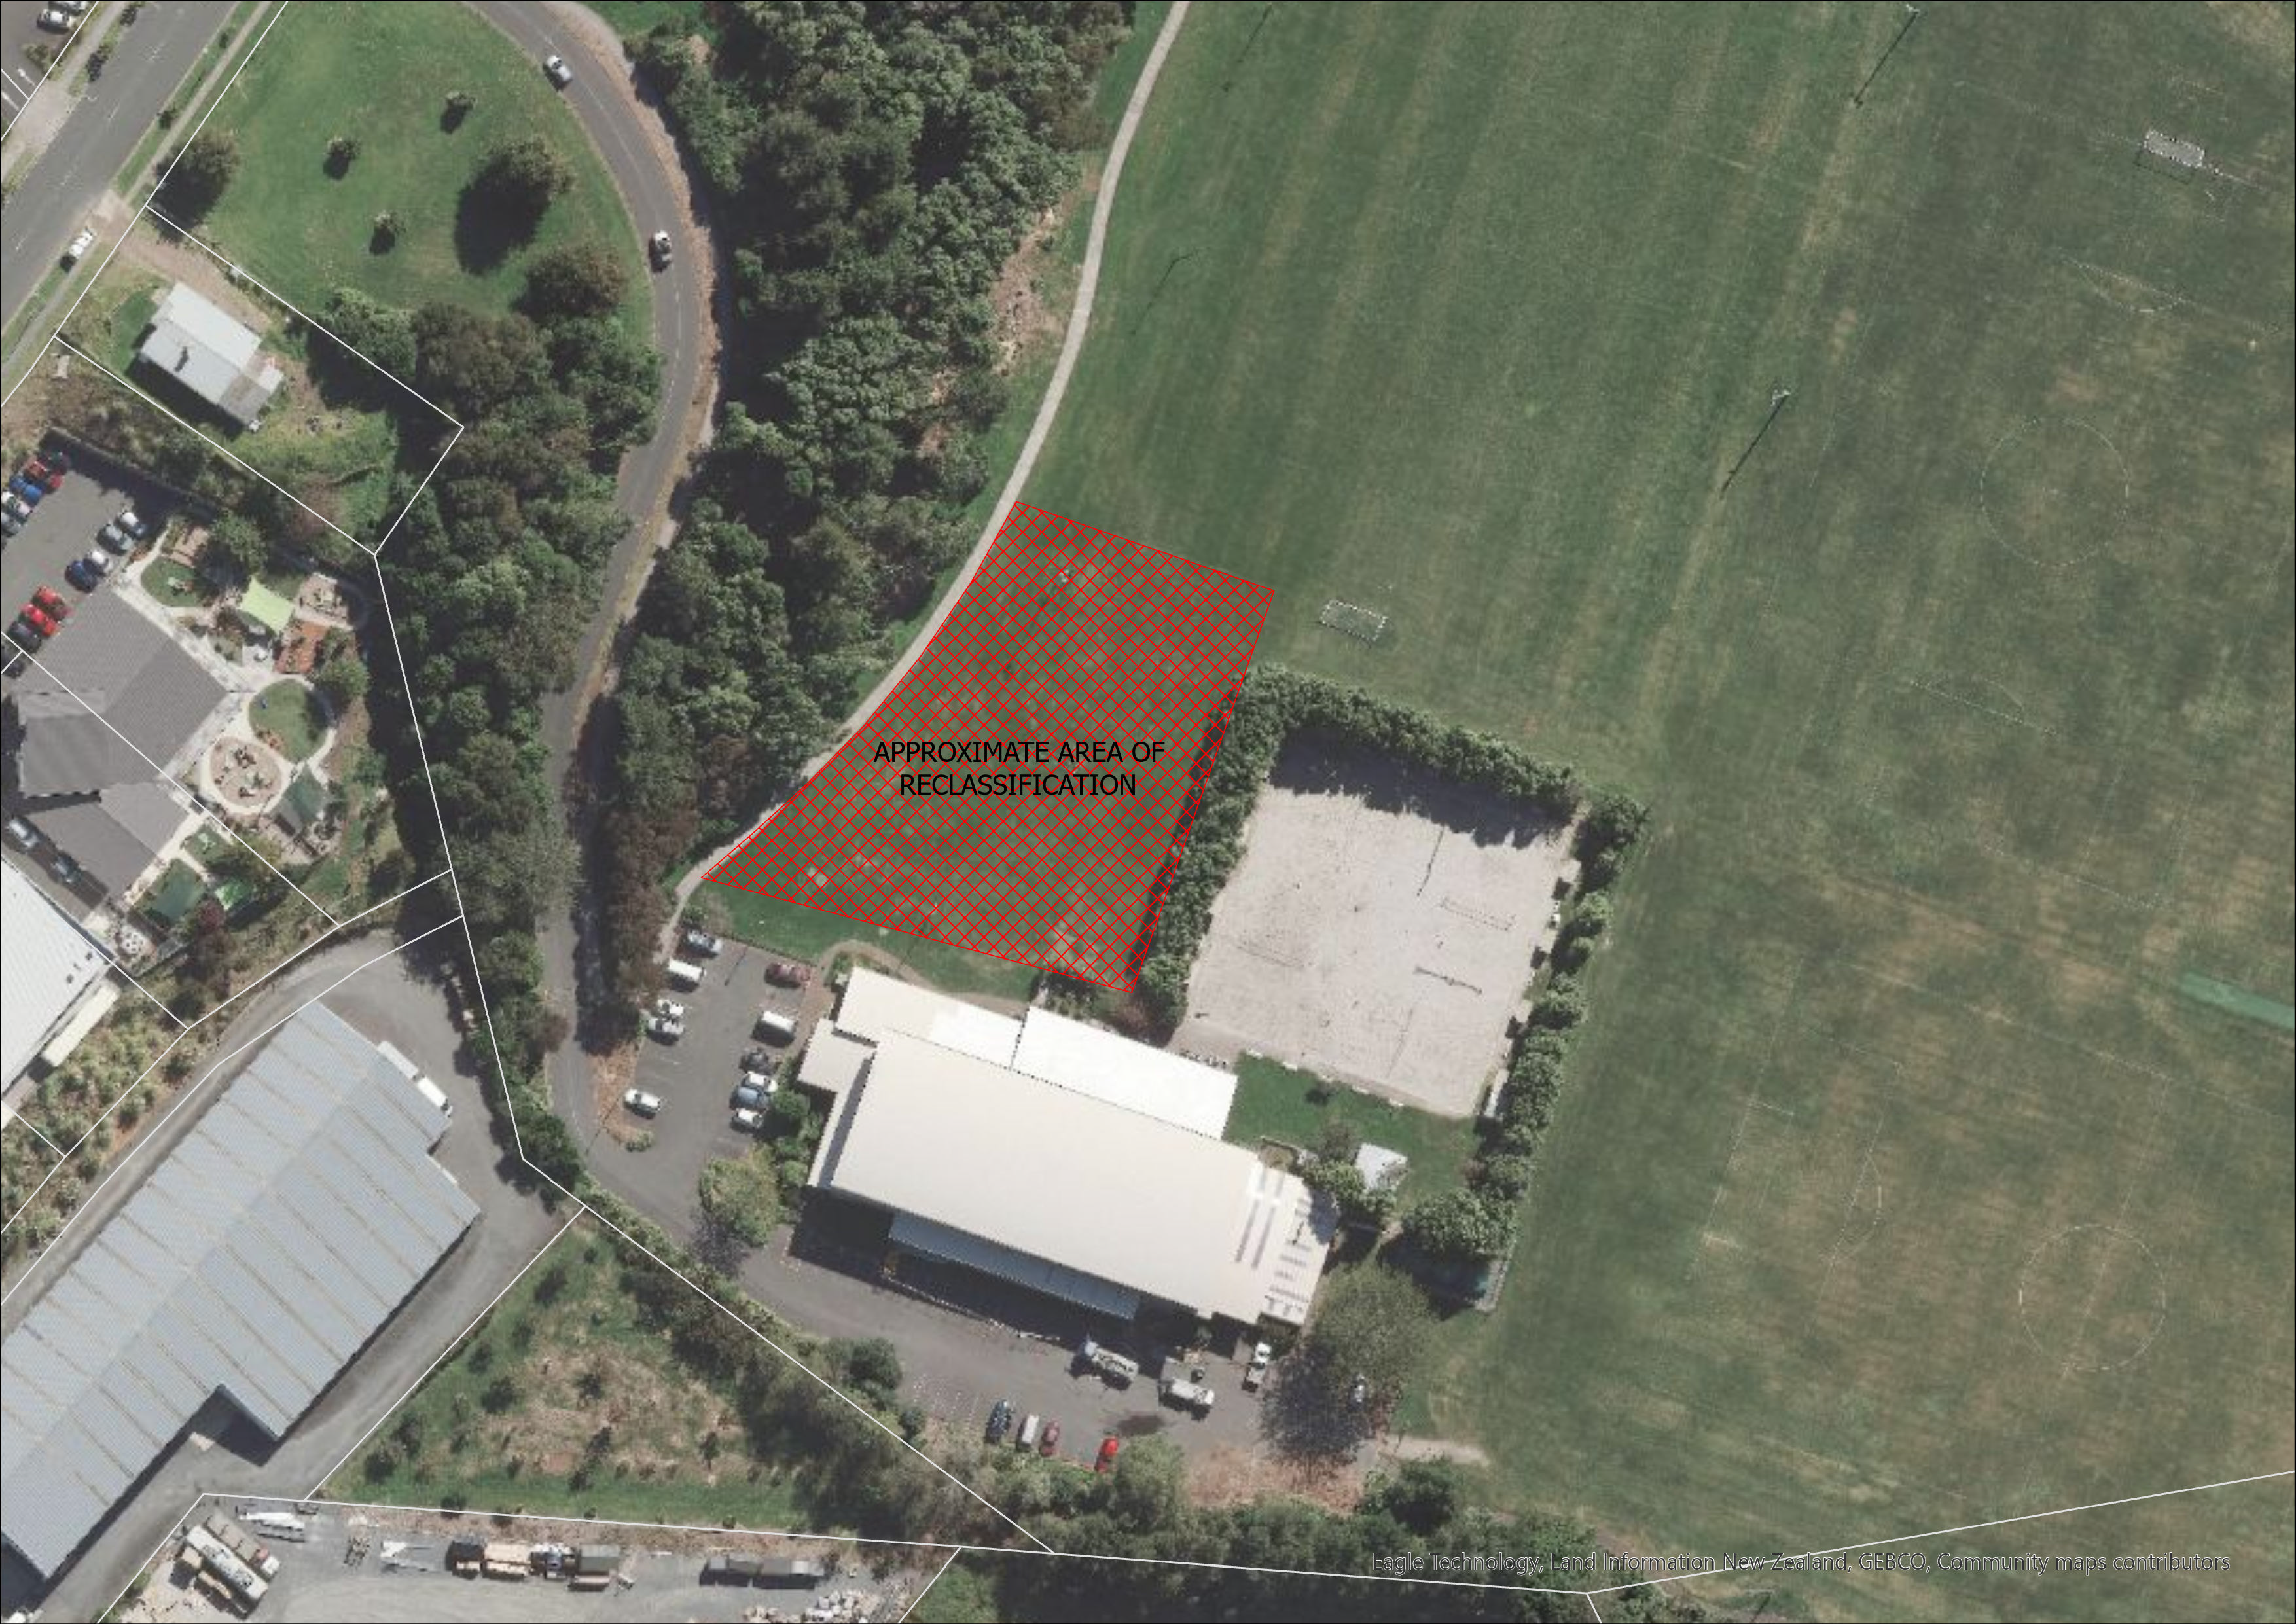 Map of Te Rapa Sportsdrome park and proposed reclassification area